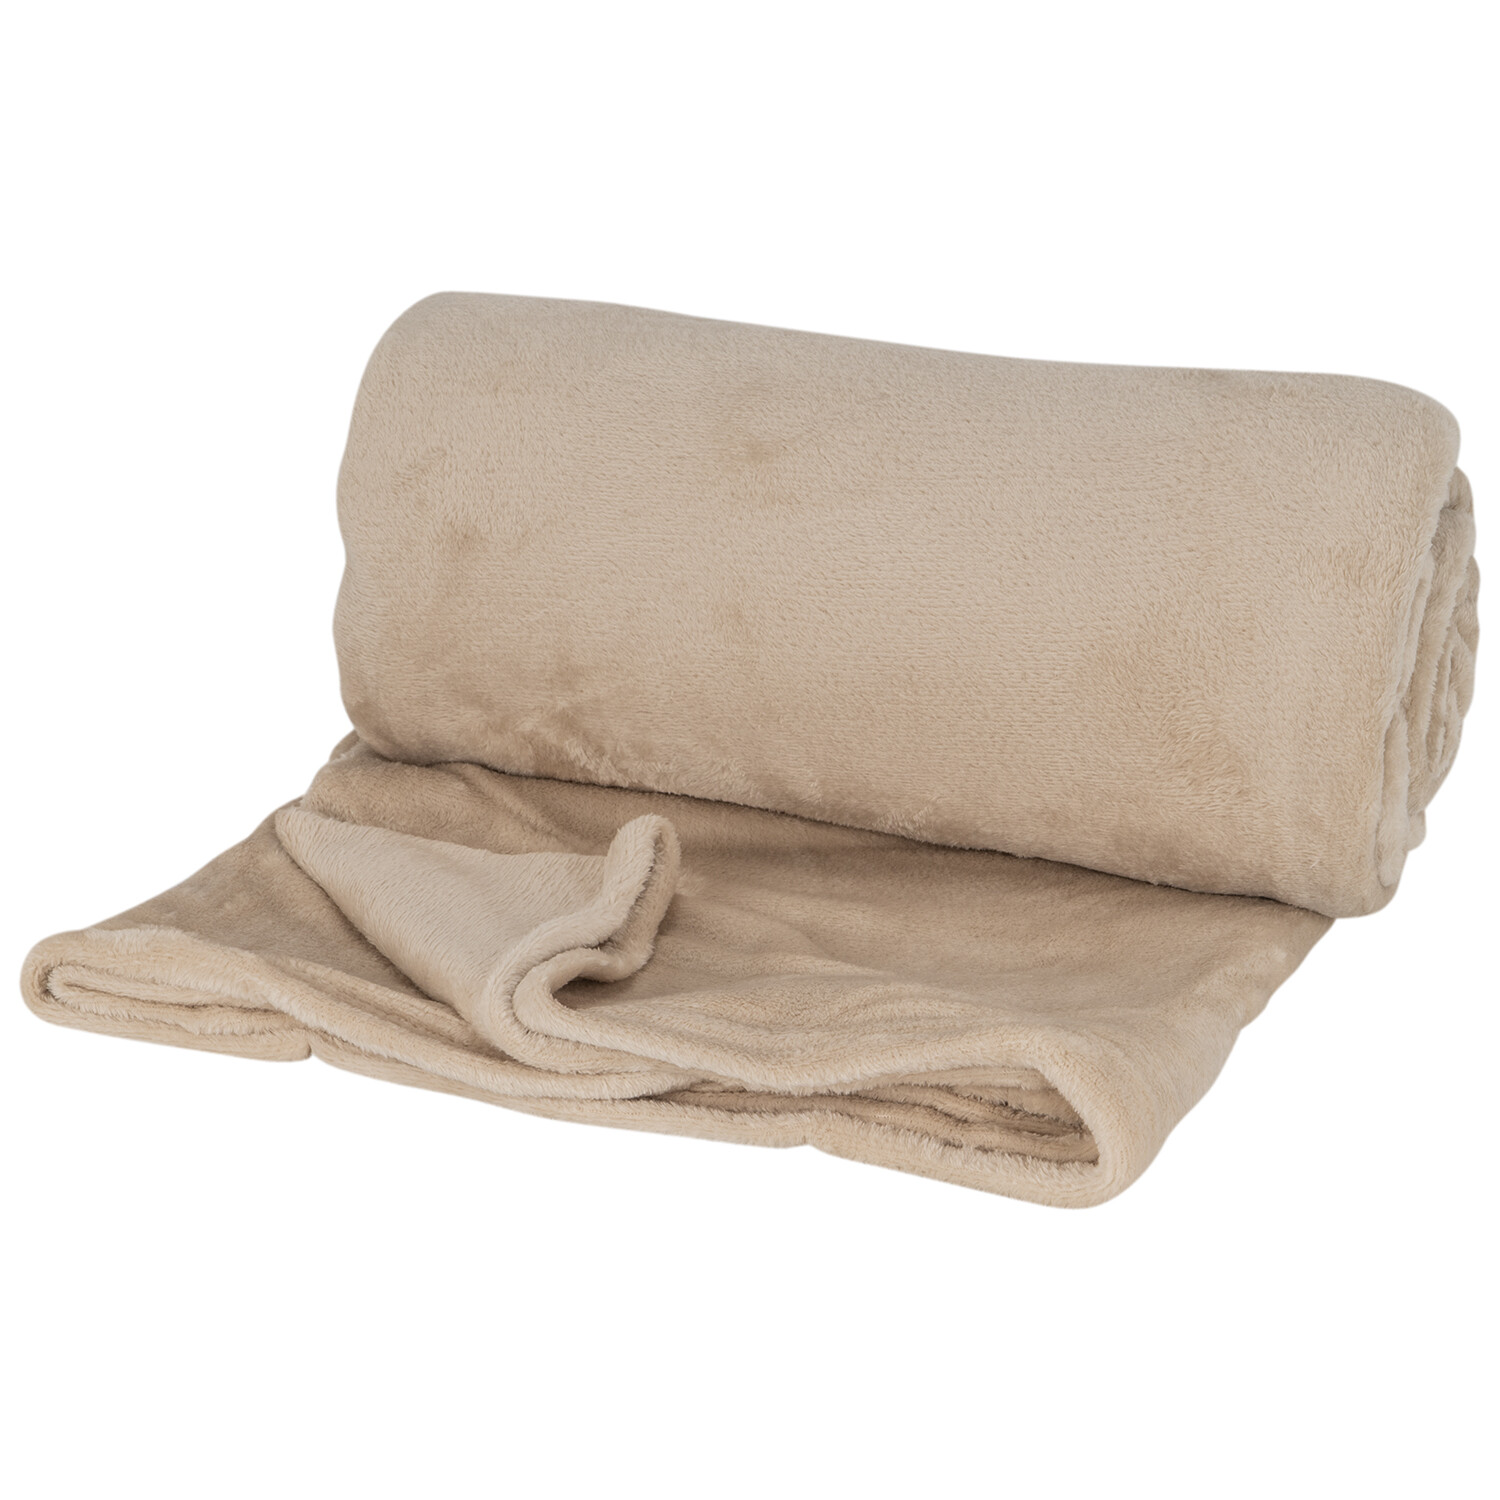 Divante Latte Supersoft Extra Large Throw Image 2